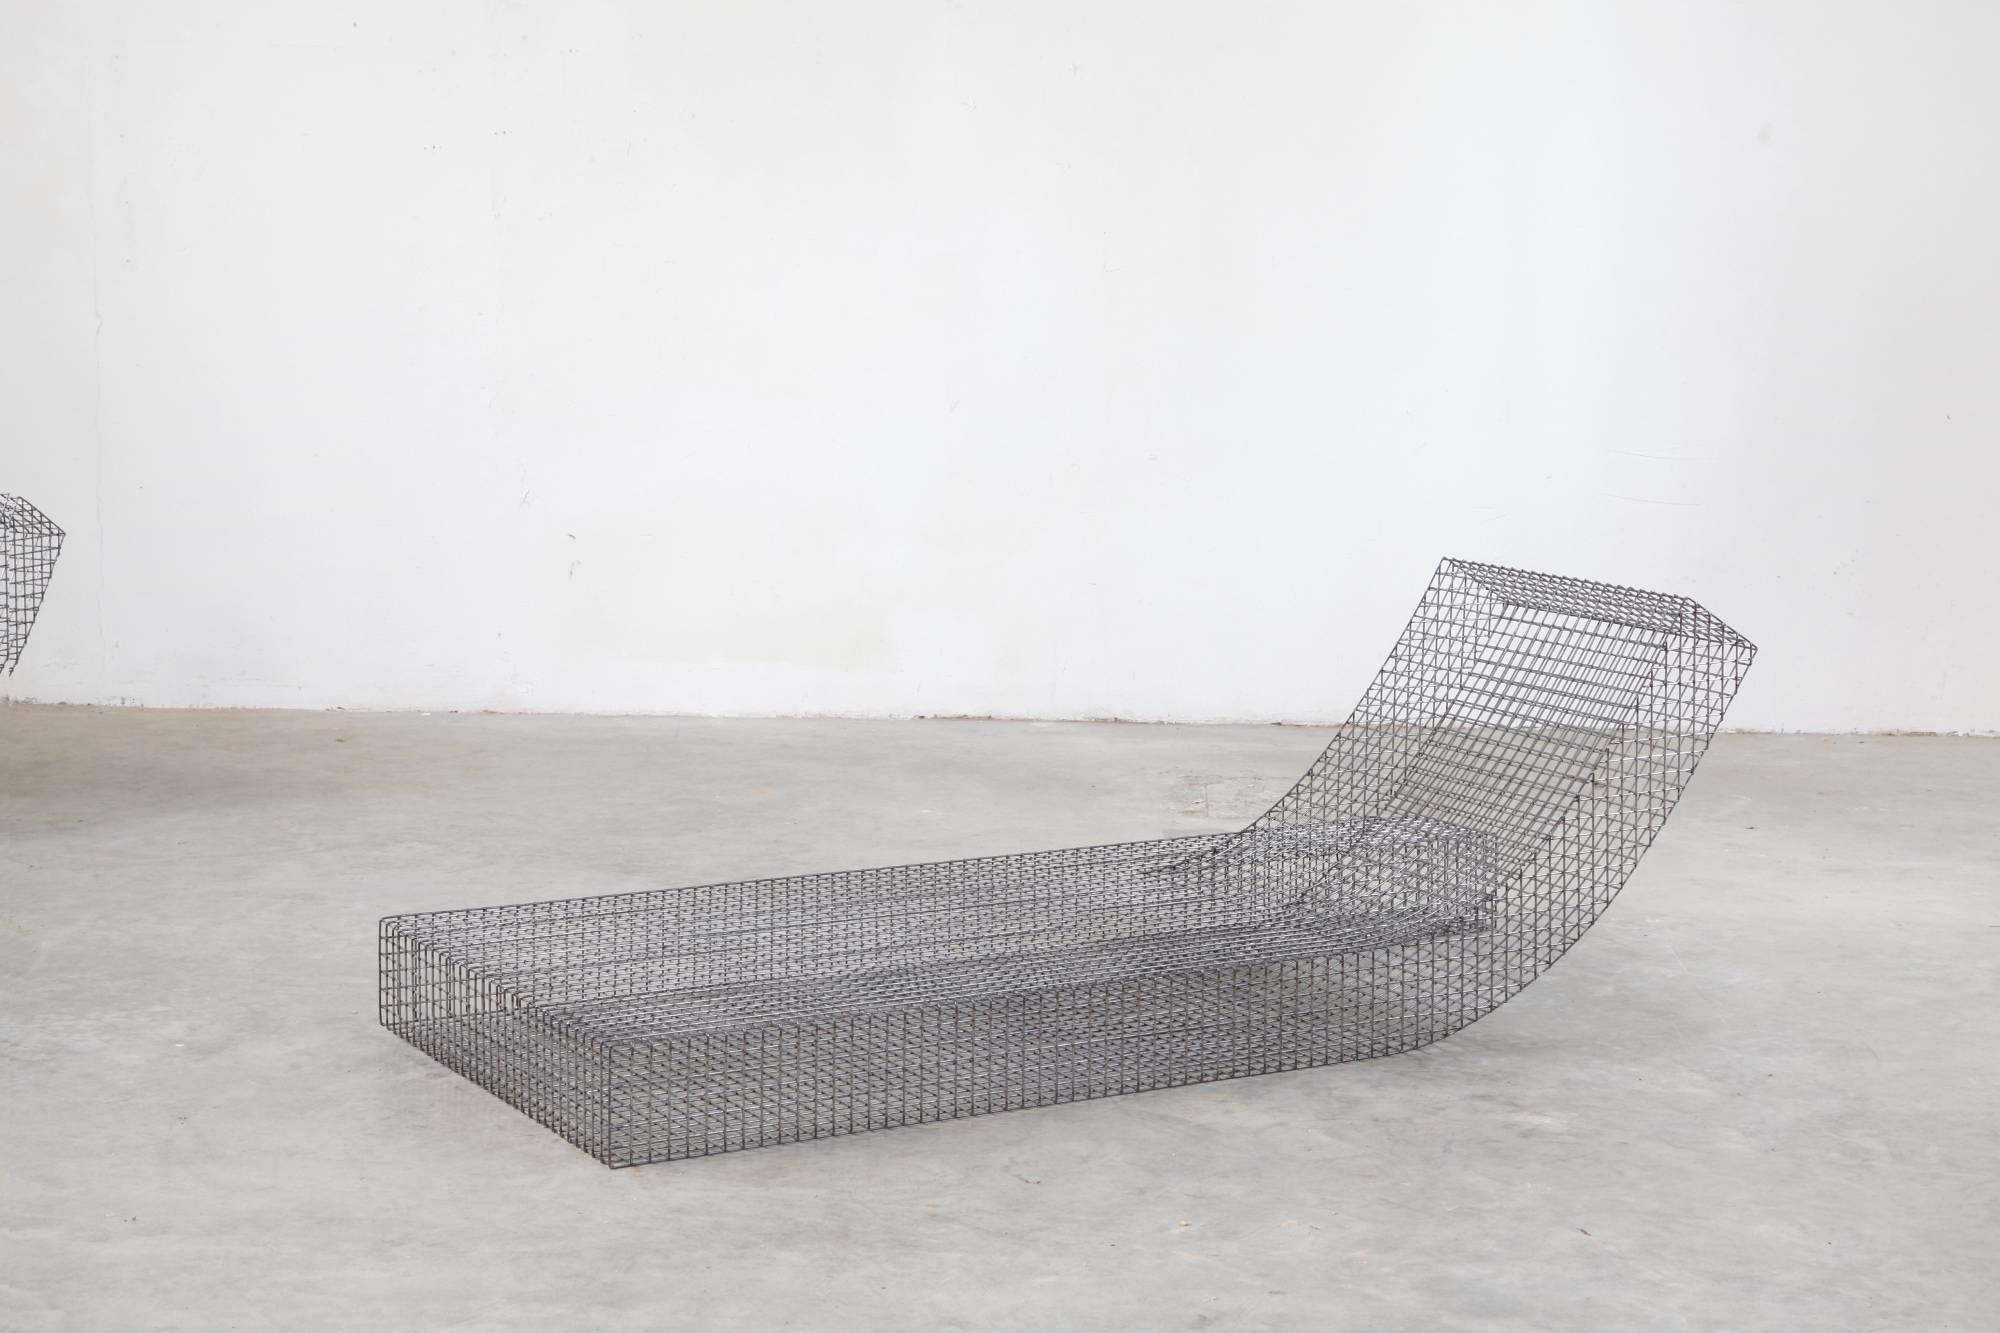 Muller Van Severen

Outdoor lounge chair model “Wire S #4”
Manufactured by Muller Van Severen
Produced for Side Gallery
Stainless steel

Measurements
177.5 cm x 80 cm x 51 H cm
69.8 in x 31.49 in x 20 H in

Edition
Open